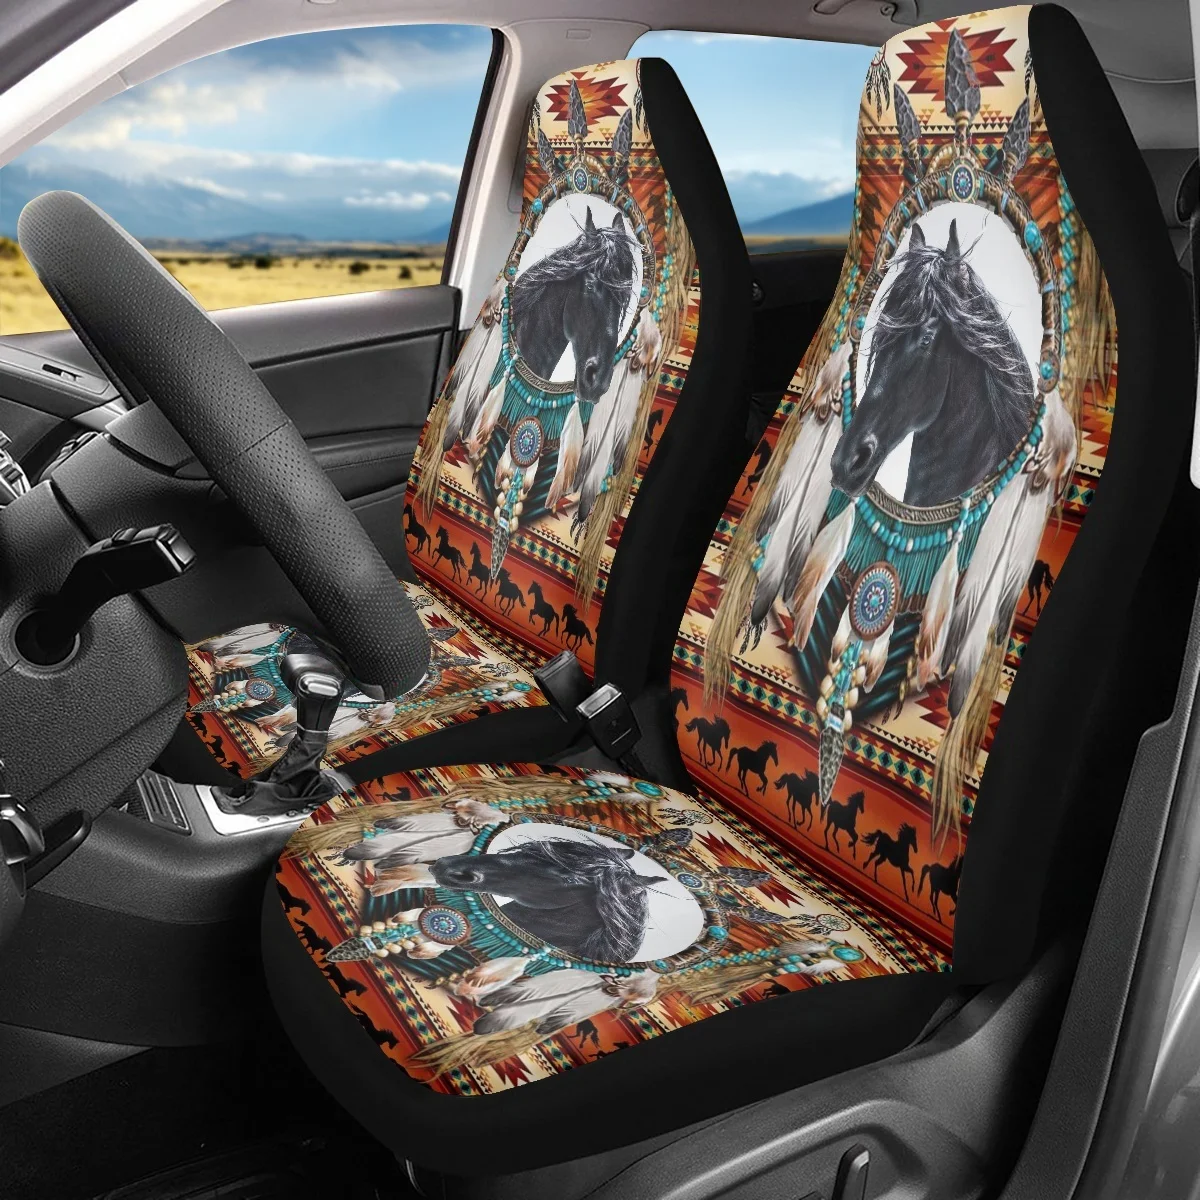 

Tribal Black Horse Aztec Pattern Automobile Seats Protector Cover asy to Install Washable Car Seat Covers Fashion Interior Decor